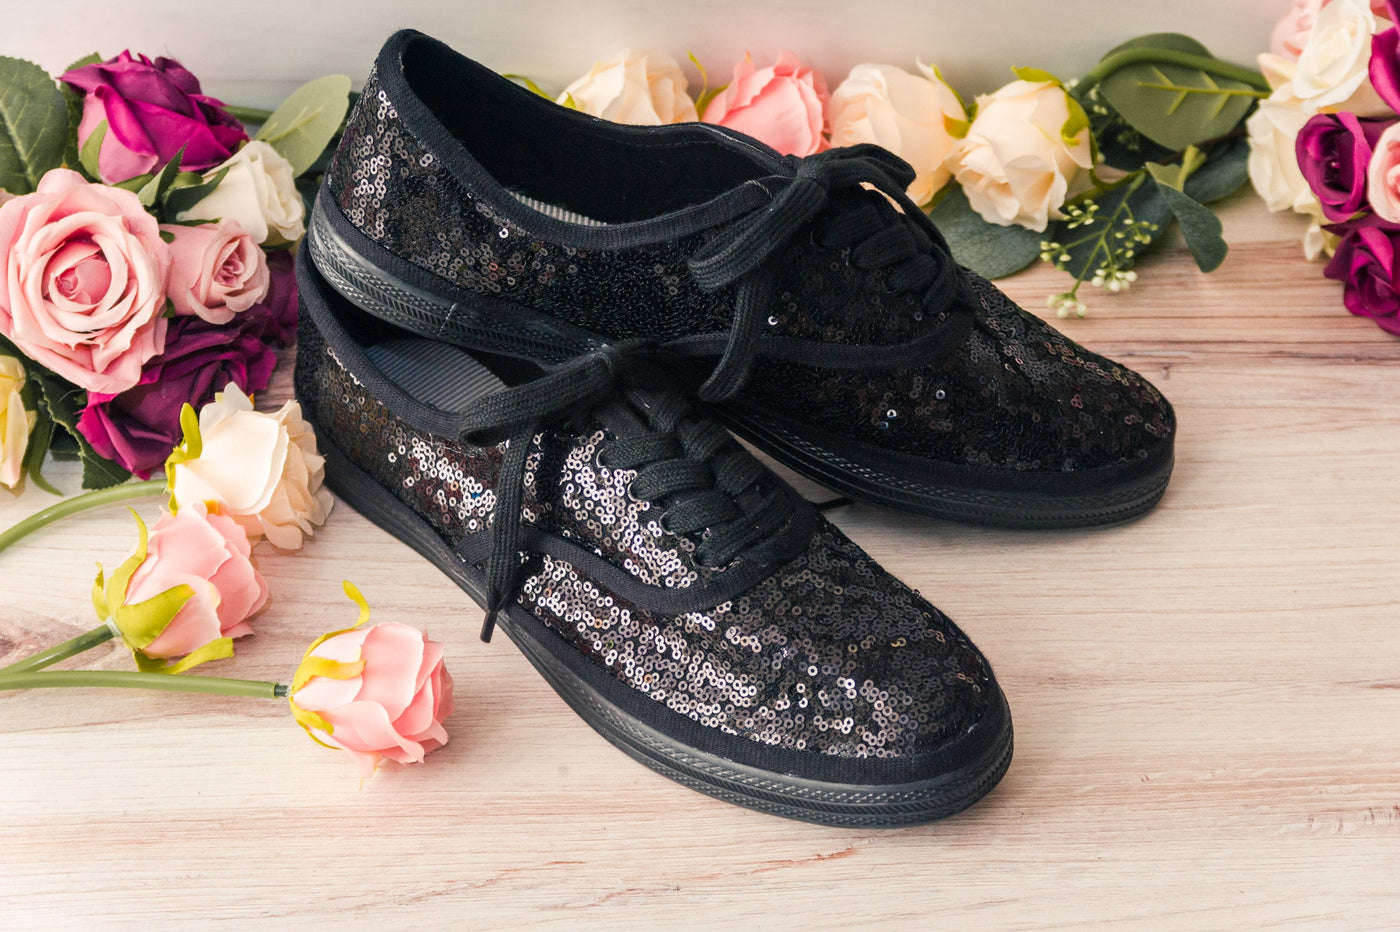 Black Wedding Shoes for Women, Custom Shoes for Women, All Black Monochrome Sequin Sneakers, Halloween, Brides, Bridesmaids, Cosplay